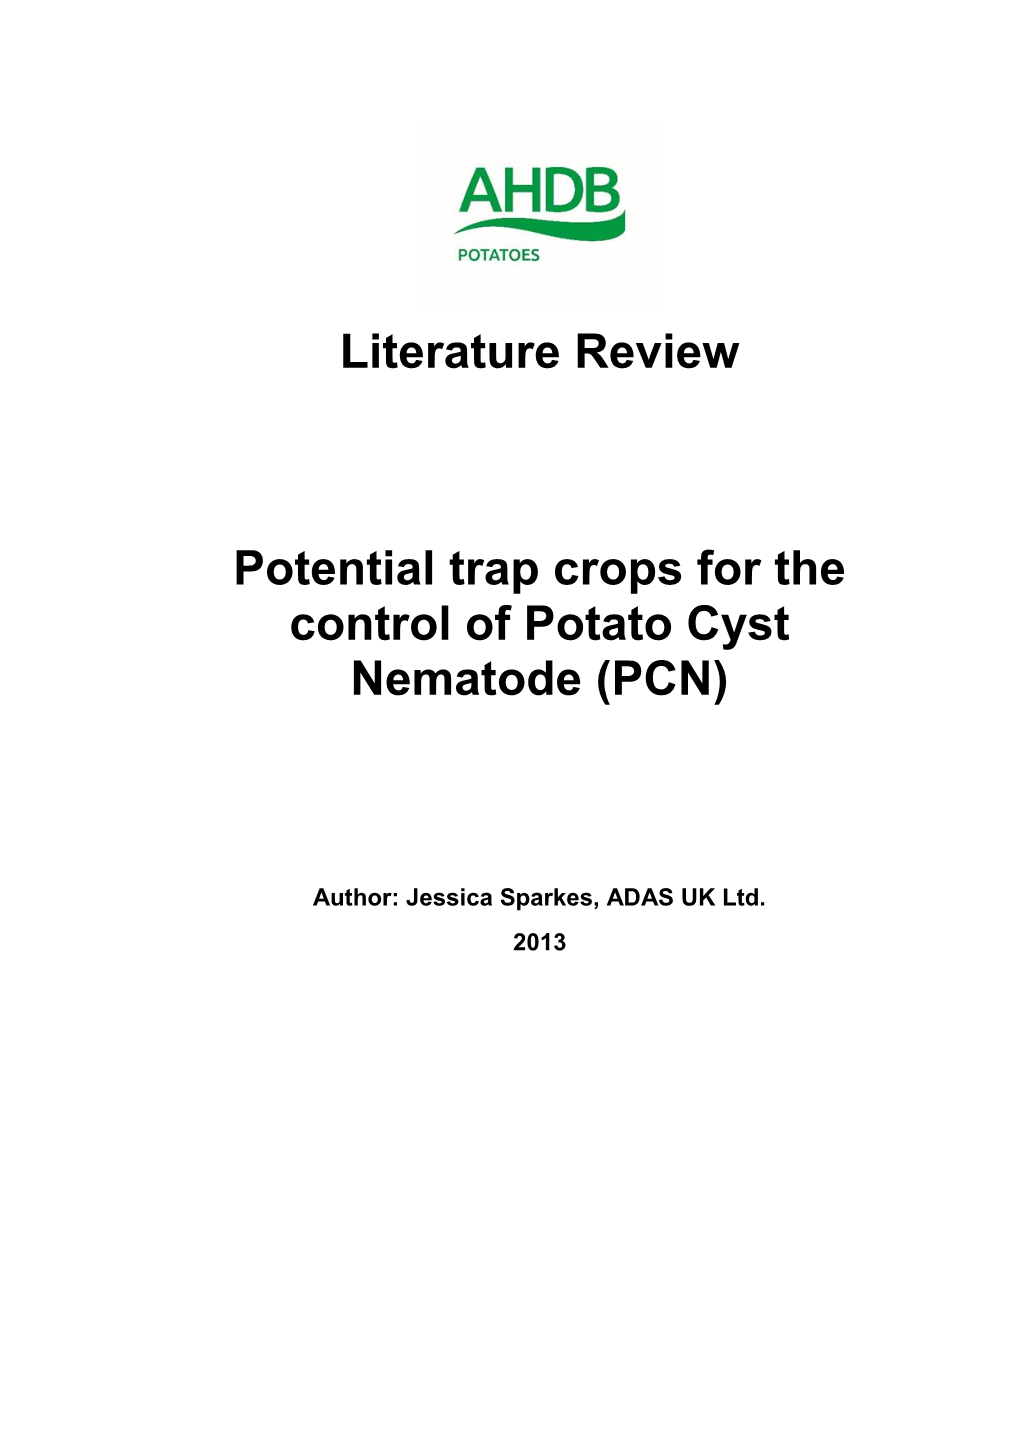 Literature Review Potential Trap Crops for the Control of Potato Cyst